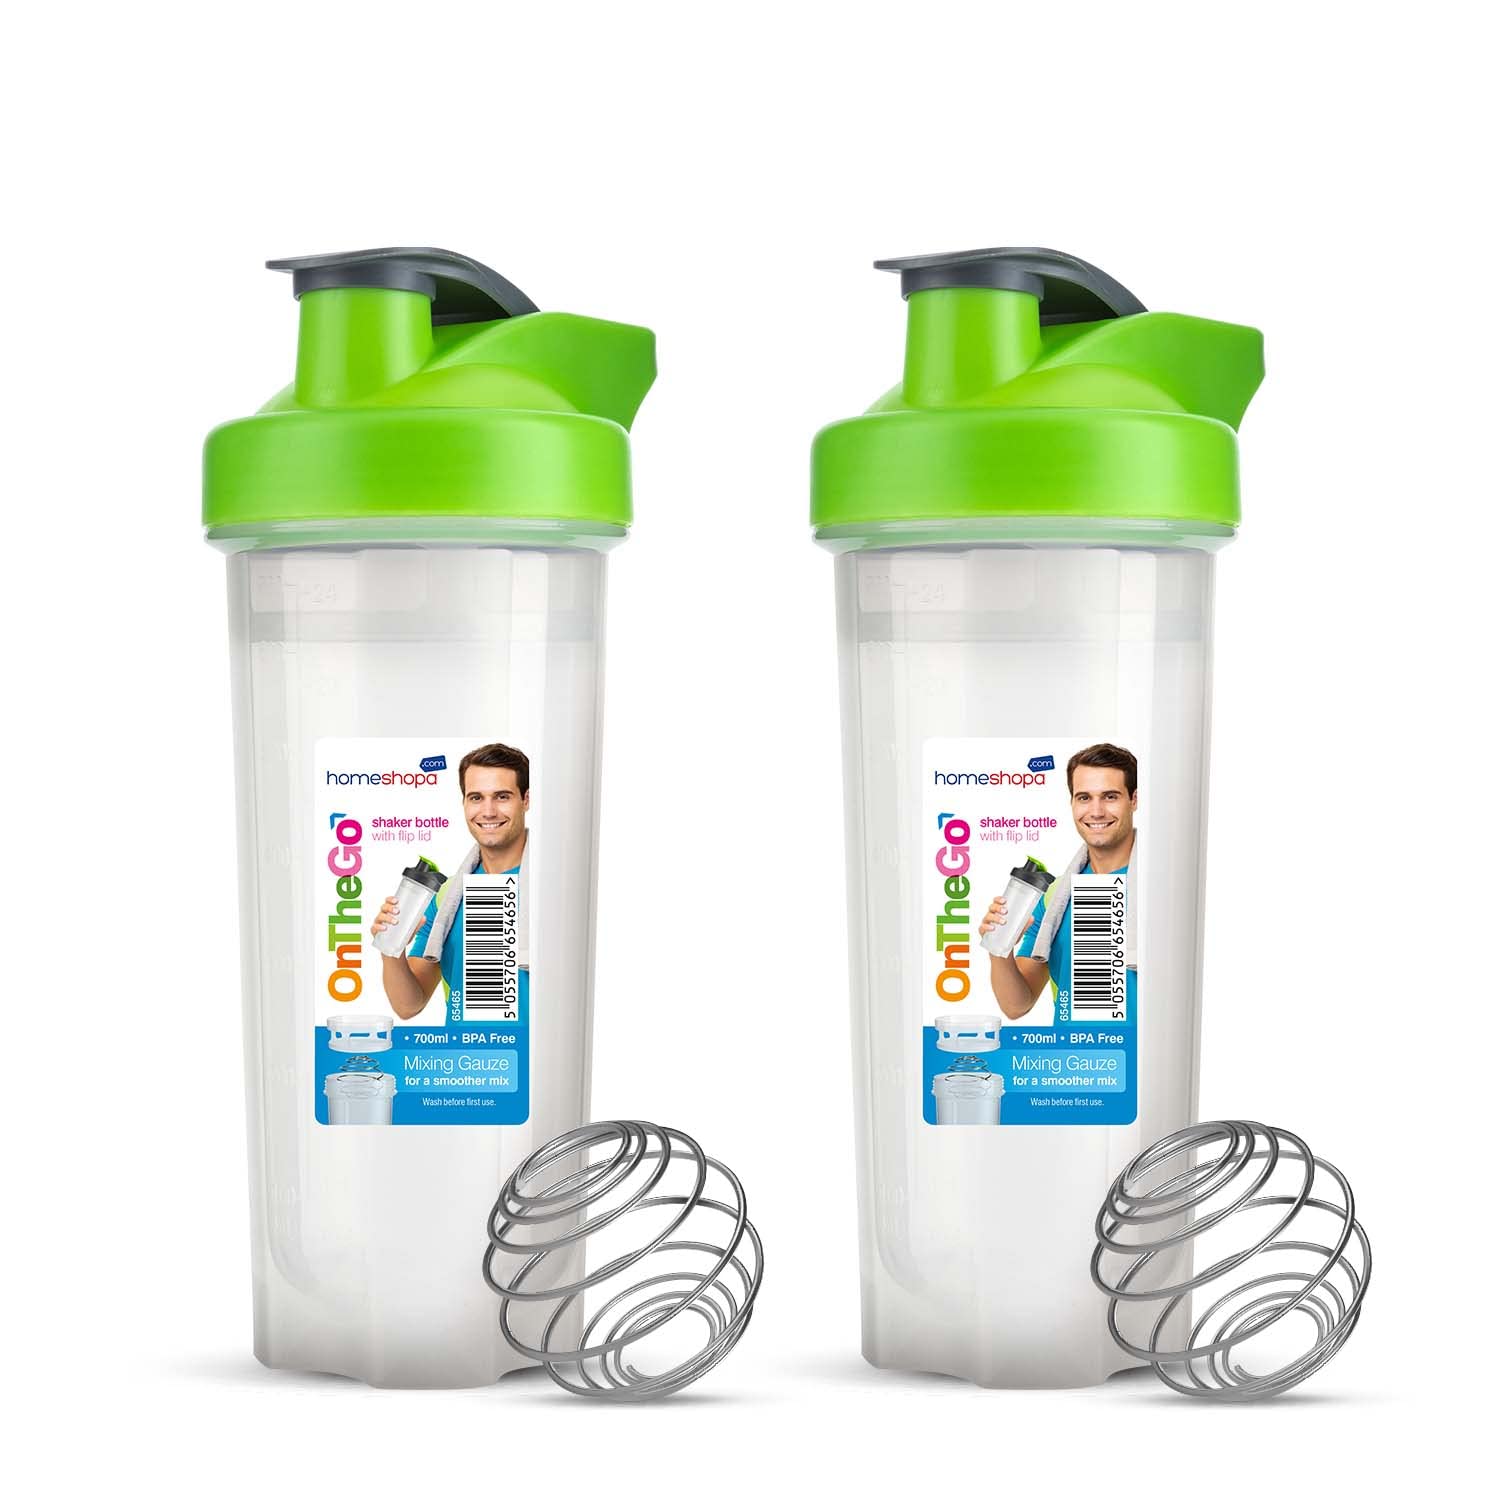 HOMESHOPA Protein Powder Shaker Bottles 700ml,Sports Water Bottle, BPA Free Leakproof, Snap-Lock Closure, Blender Bottle with Mixer Ball, Perfect for Protein Shakes, Nutrition & Smoothies-Pack of 2